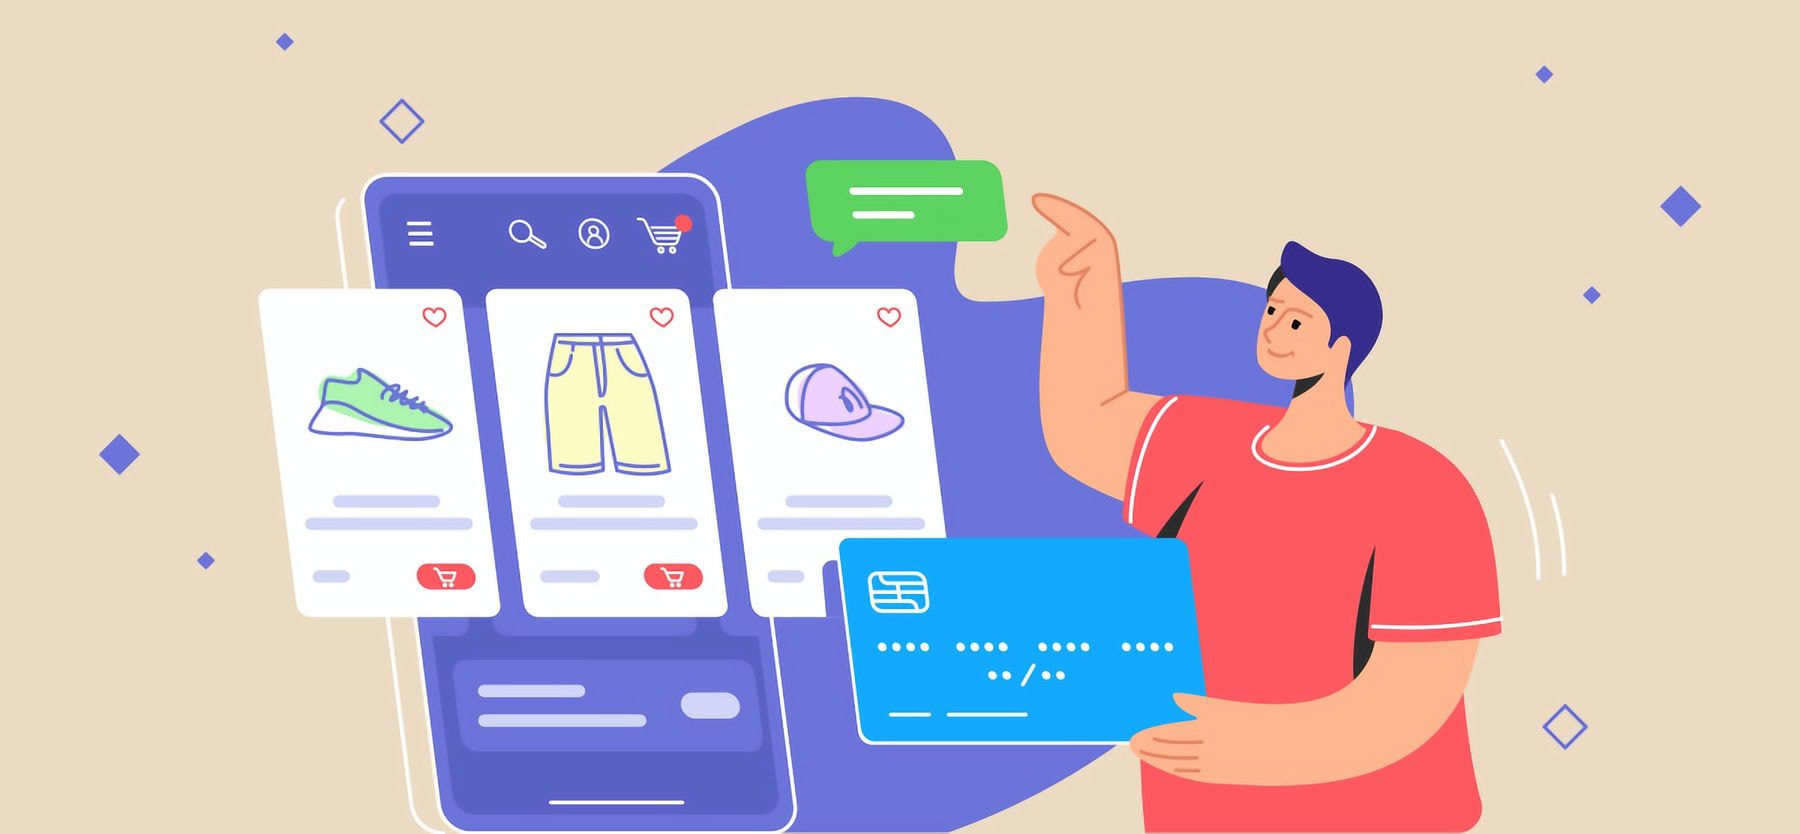 Illustration of Selling Products Online - Payment